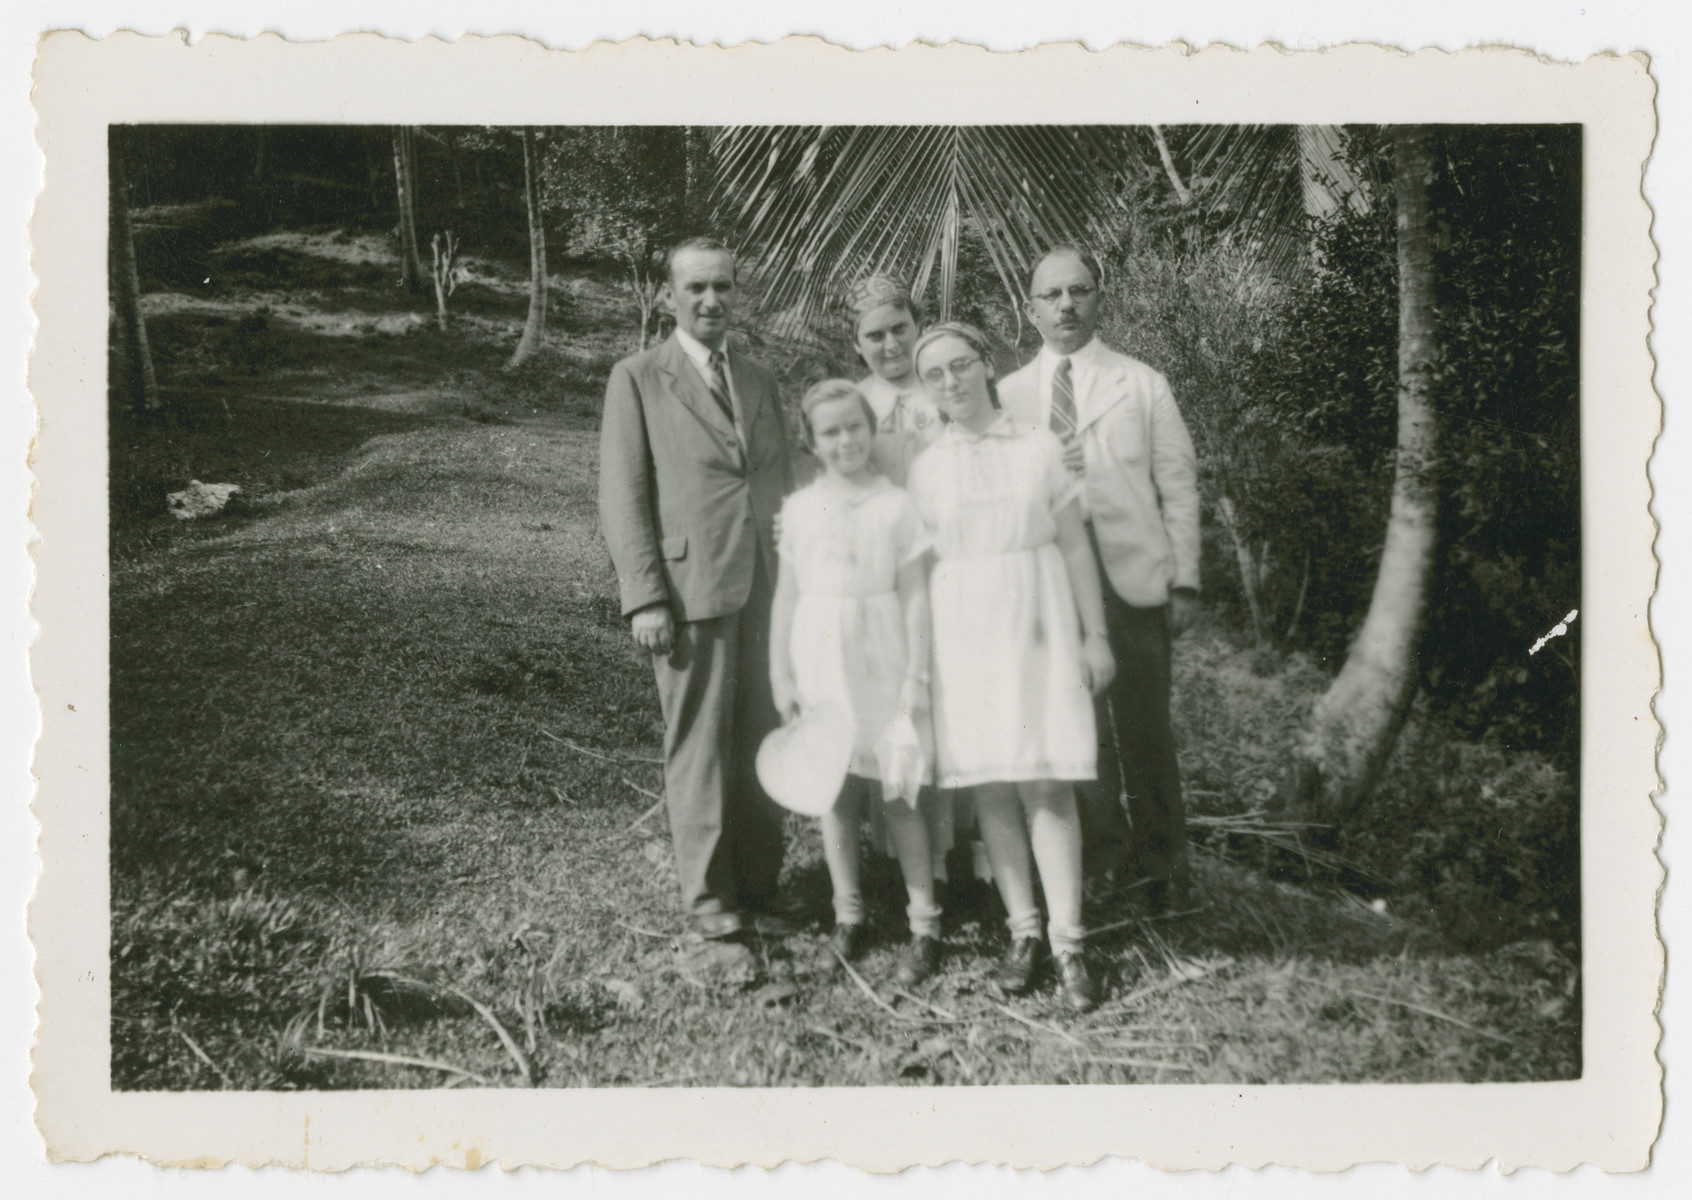 The Tauscher family poses outside in Trinidad where they arrived as refugees.

From left to right are [possibly Erich], Alice Tauscher, Bertha Tauscher, Trudie Tauscher and Victor Stecher.